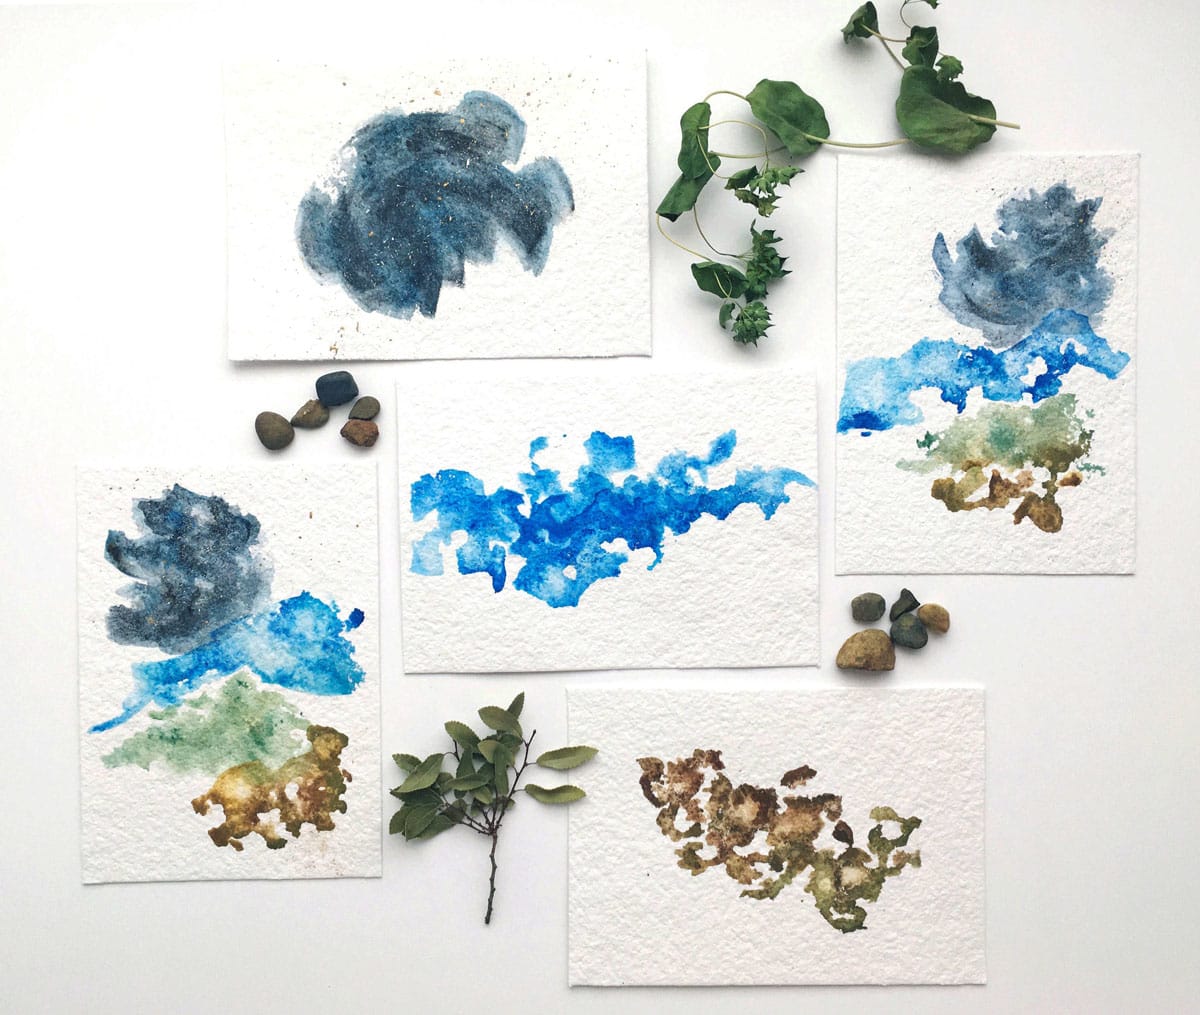 Earth, Sea, Sky by Olivia Lin  Image: $95 Each  or $475 for All Five